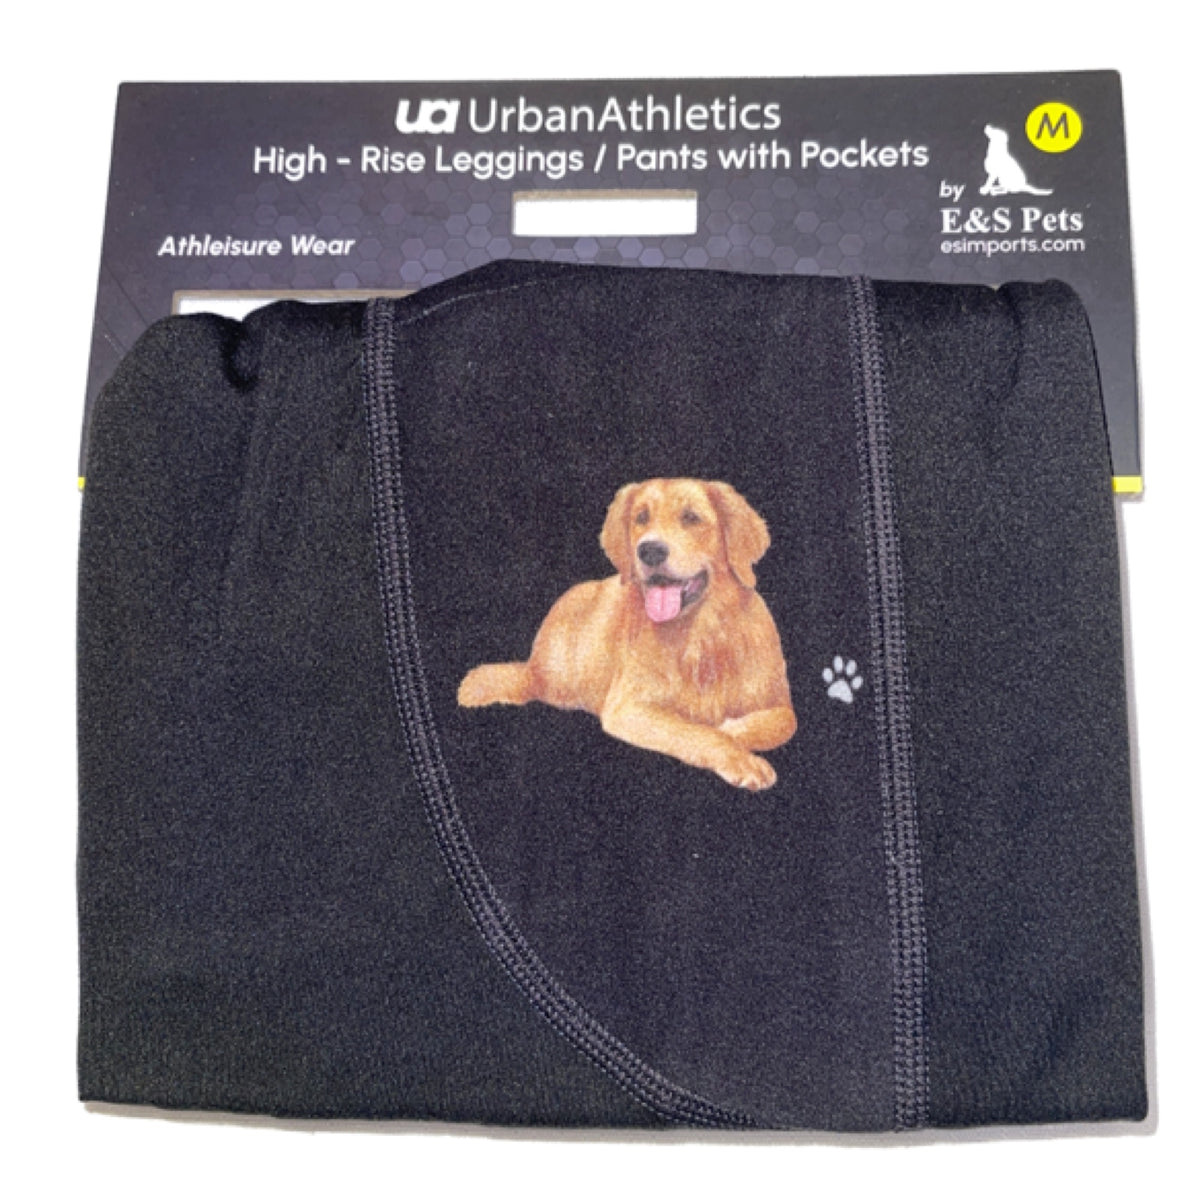 High-Rise Leggings with Pockets - Yorkshire Terrier (Yorkie) - Decadent Dogs